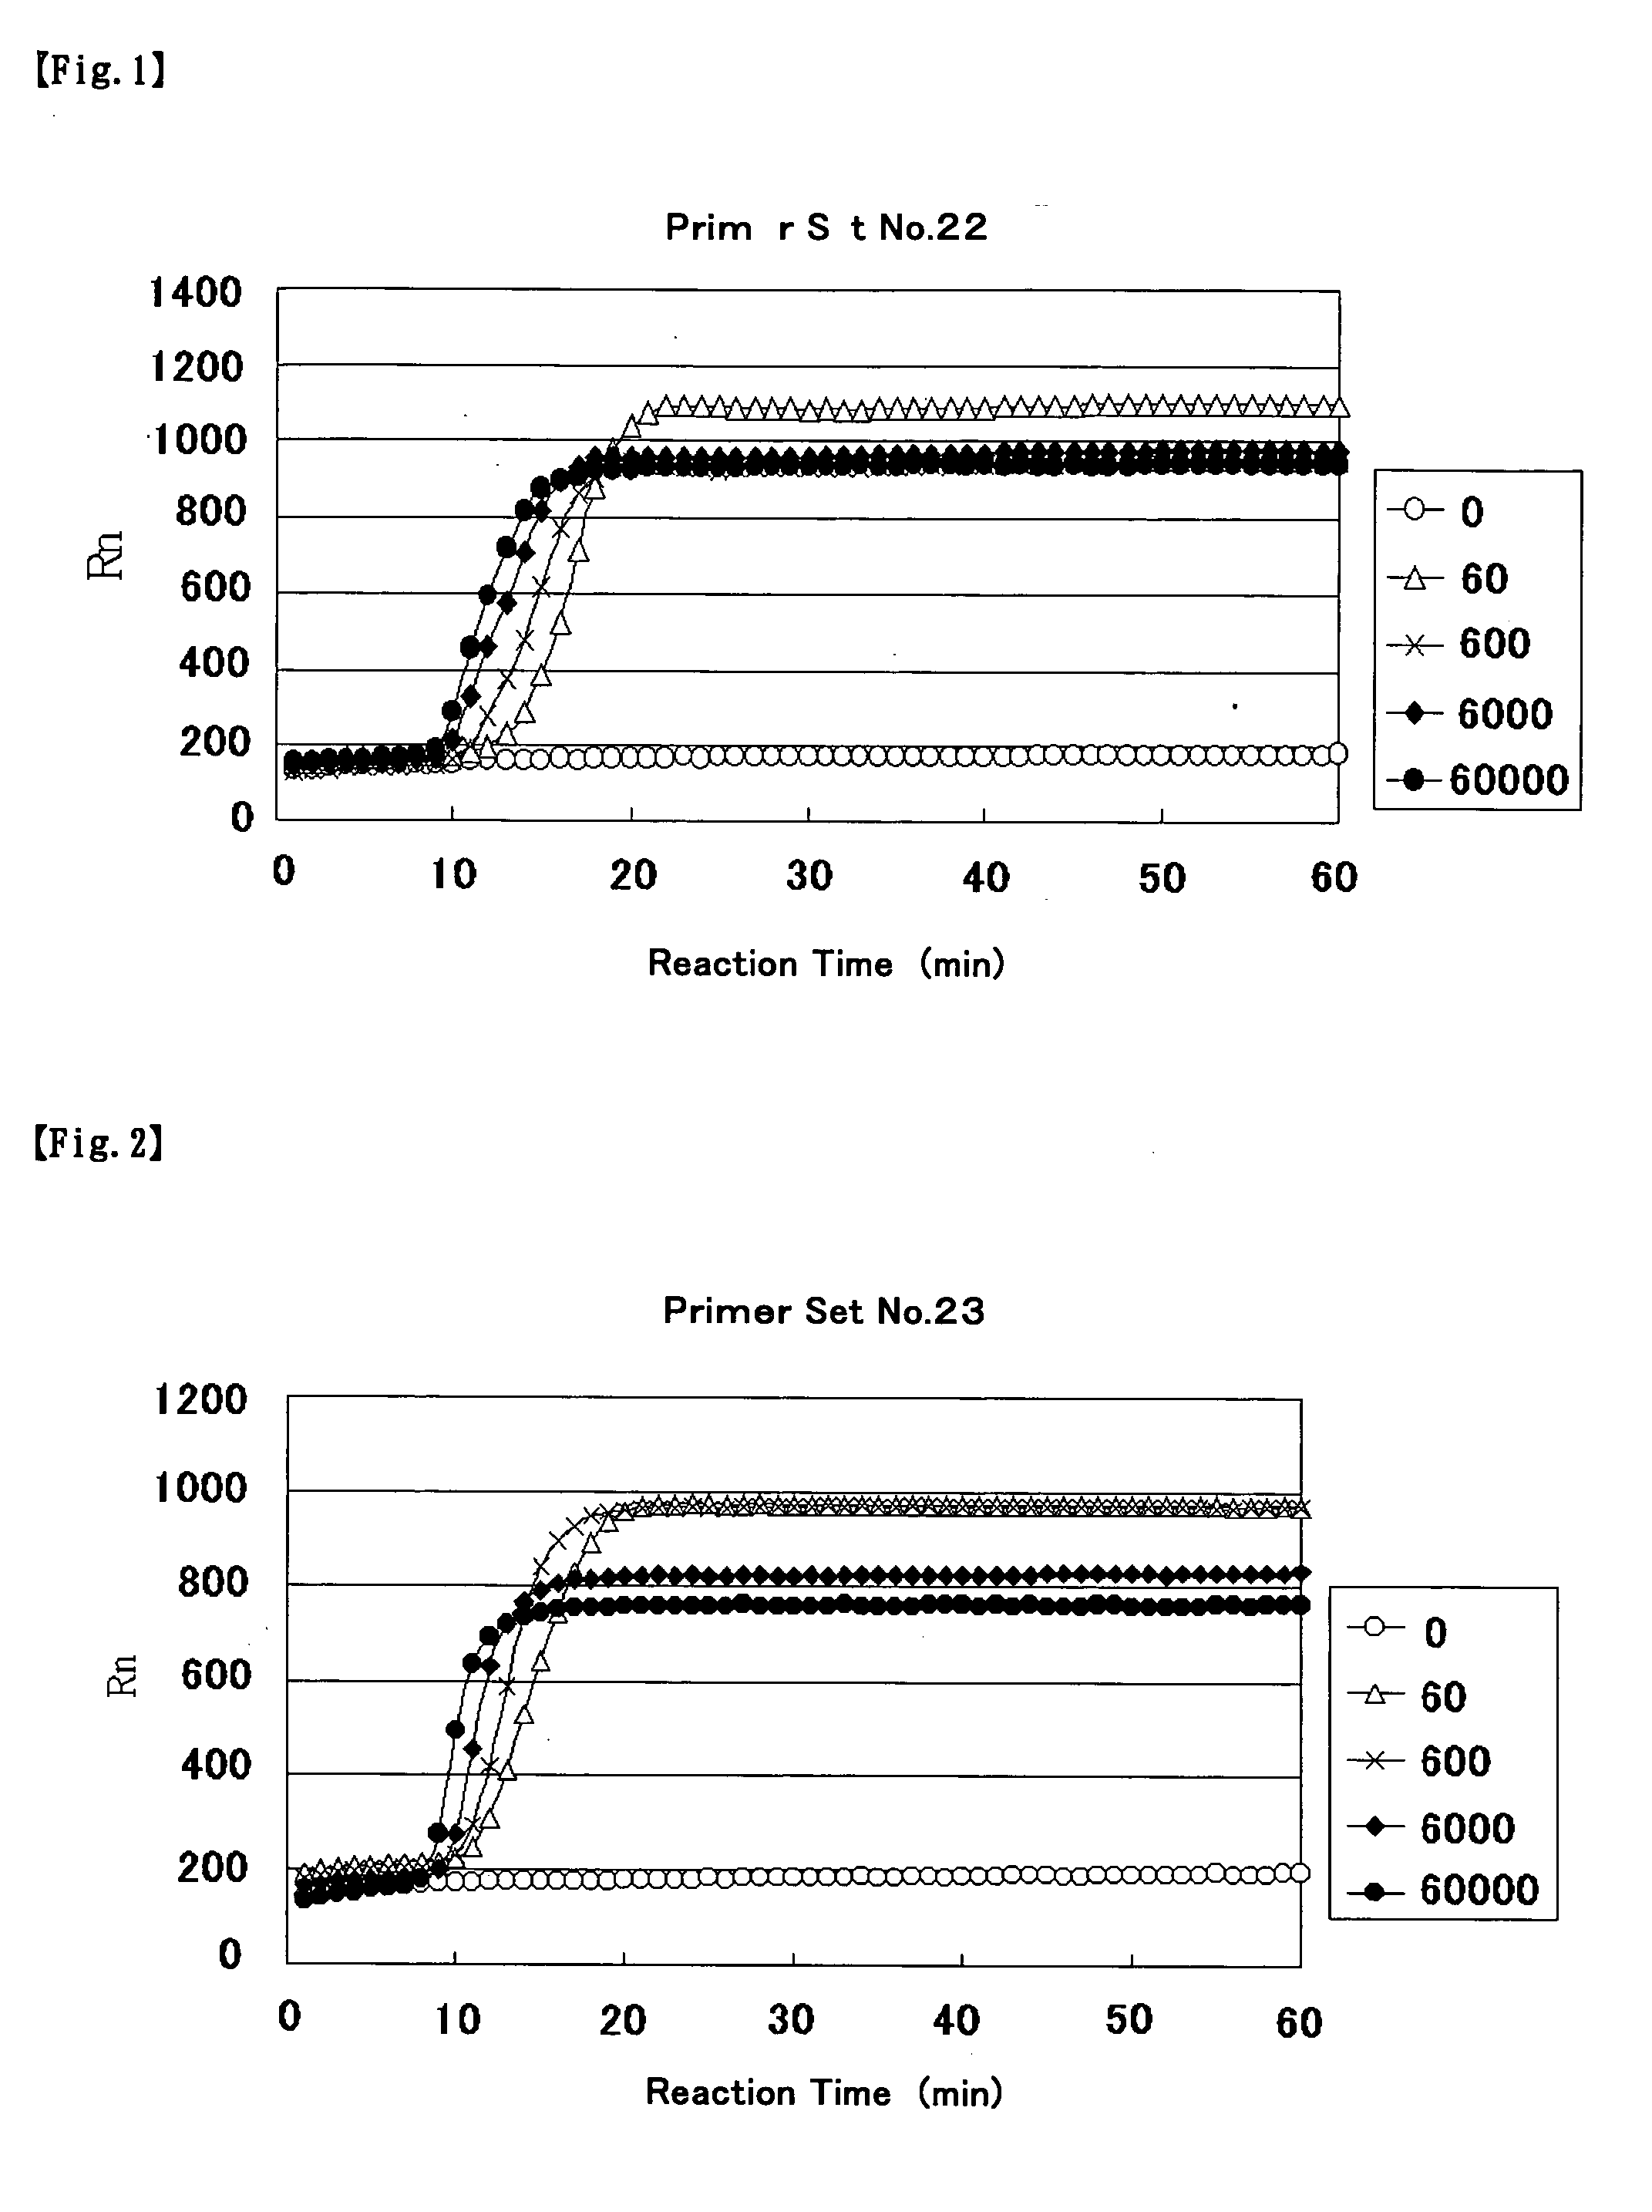 Primer for nucleic acid amplification to detect carcinoembryonic antigen and test method using such primer